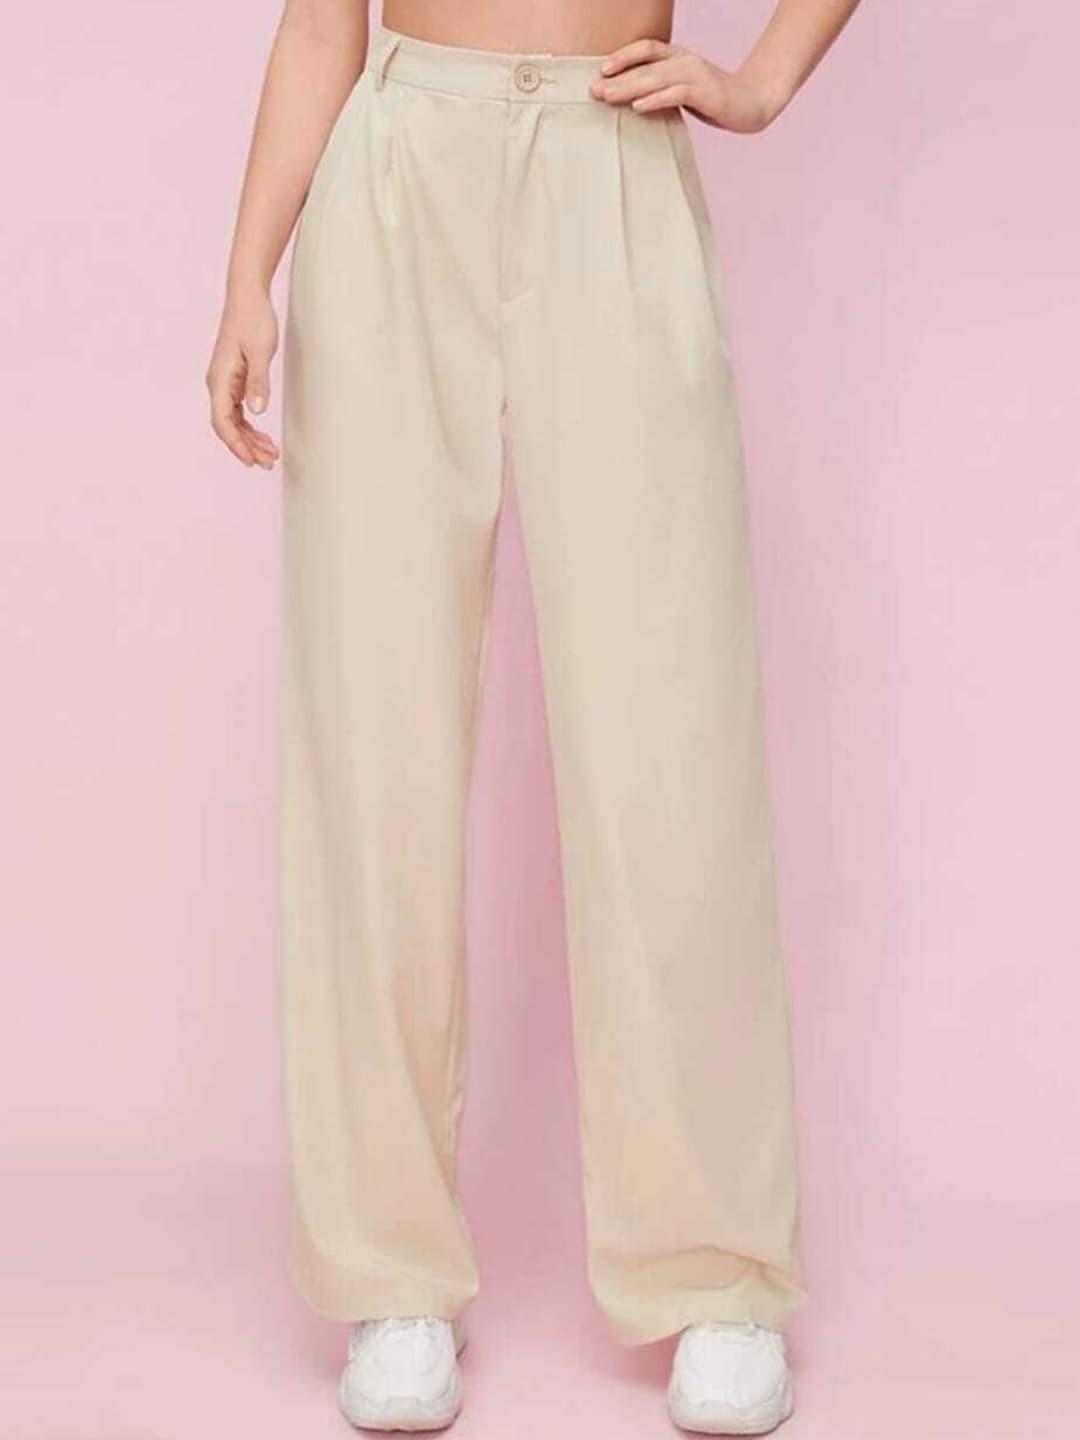 next-one-women-smart-high-rise-easy-wash-cotton-loose-fit-parallel-trousers